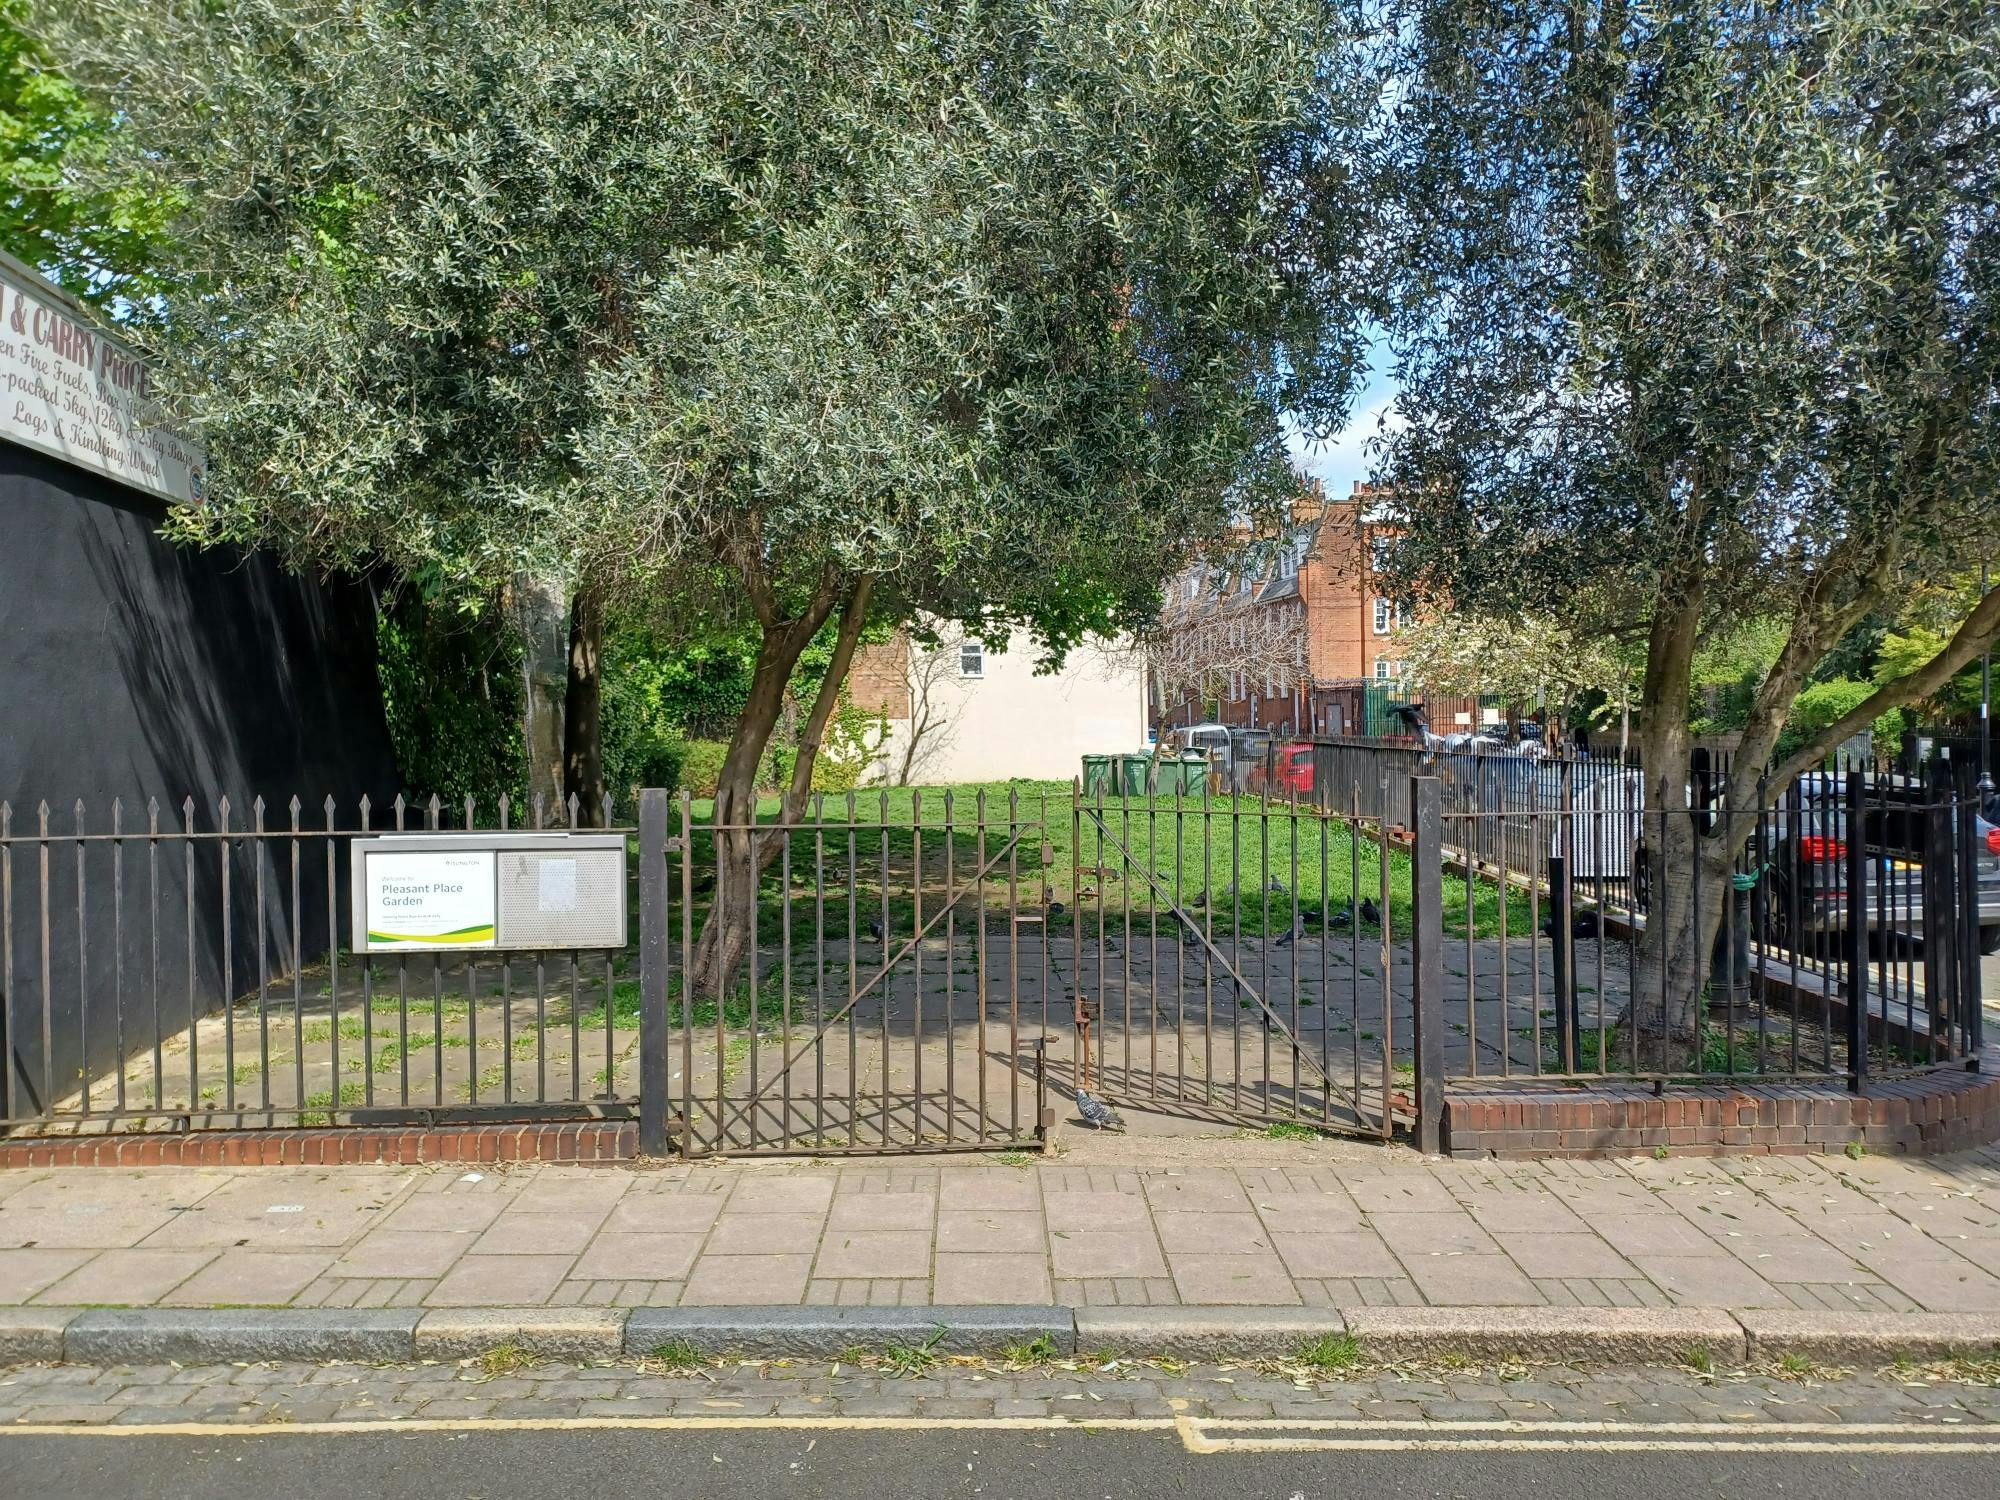 View from Halton Cross Street towards the gates of the park